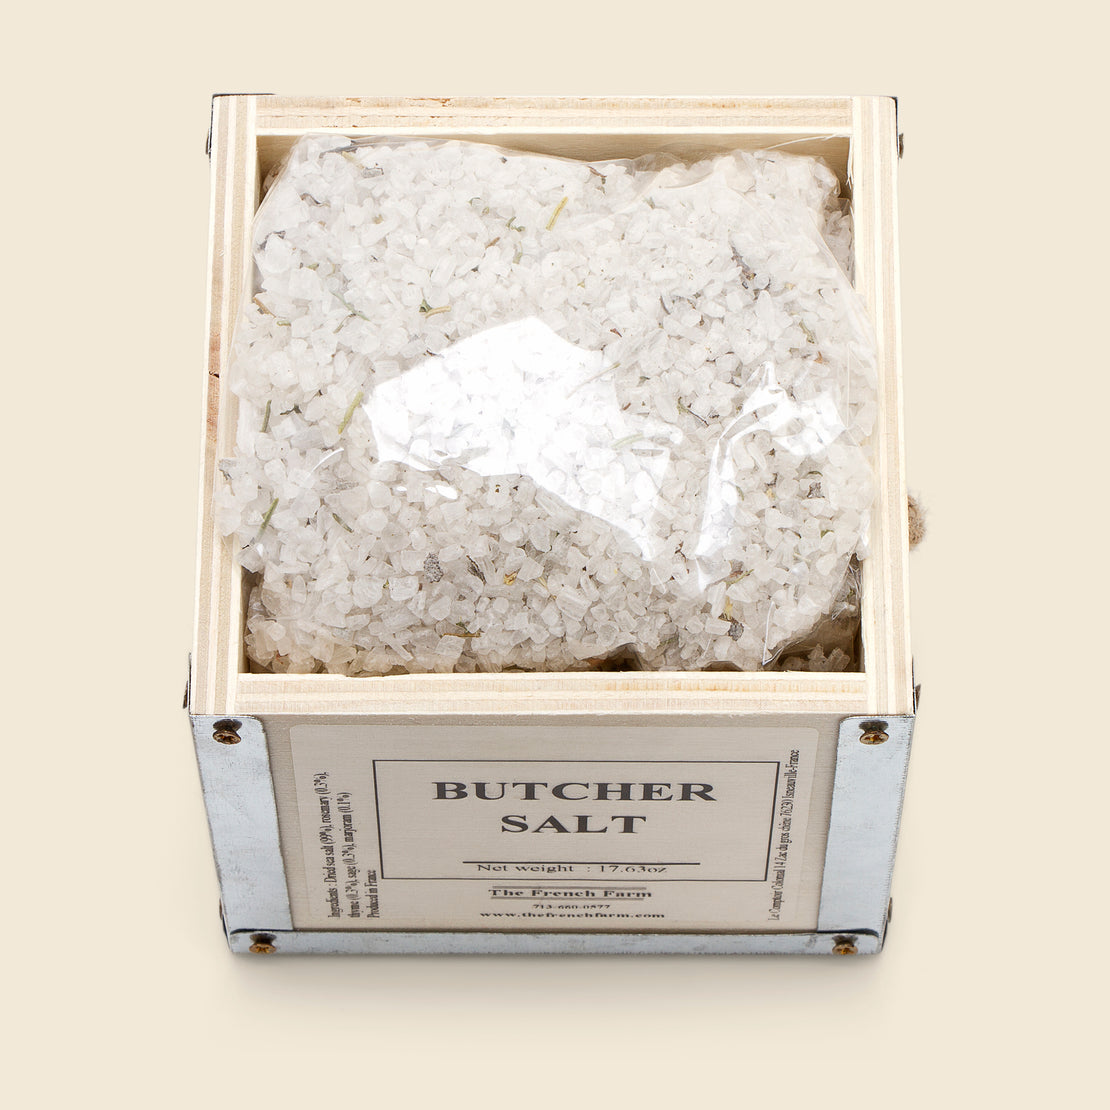 Butcher Salt Box - Home - STAG Provisions - Home - Kitchen - Cooking